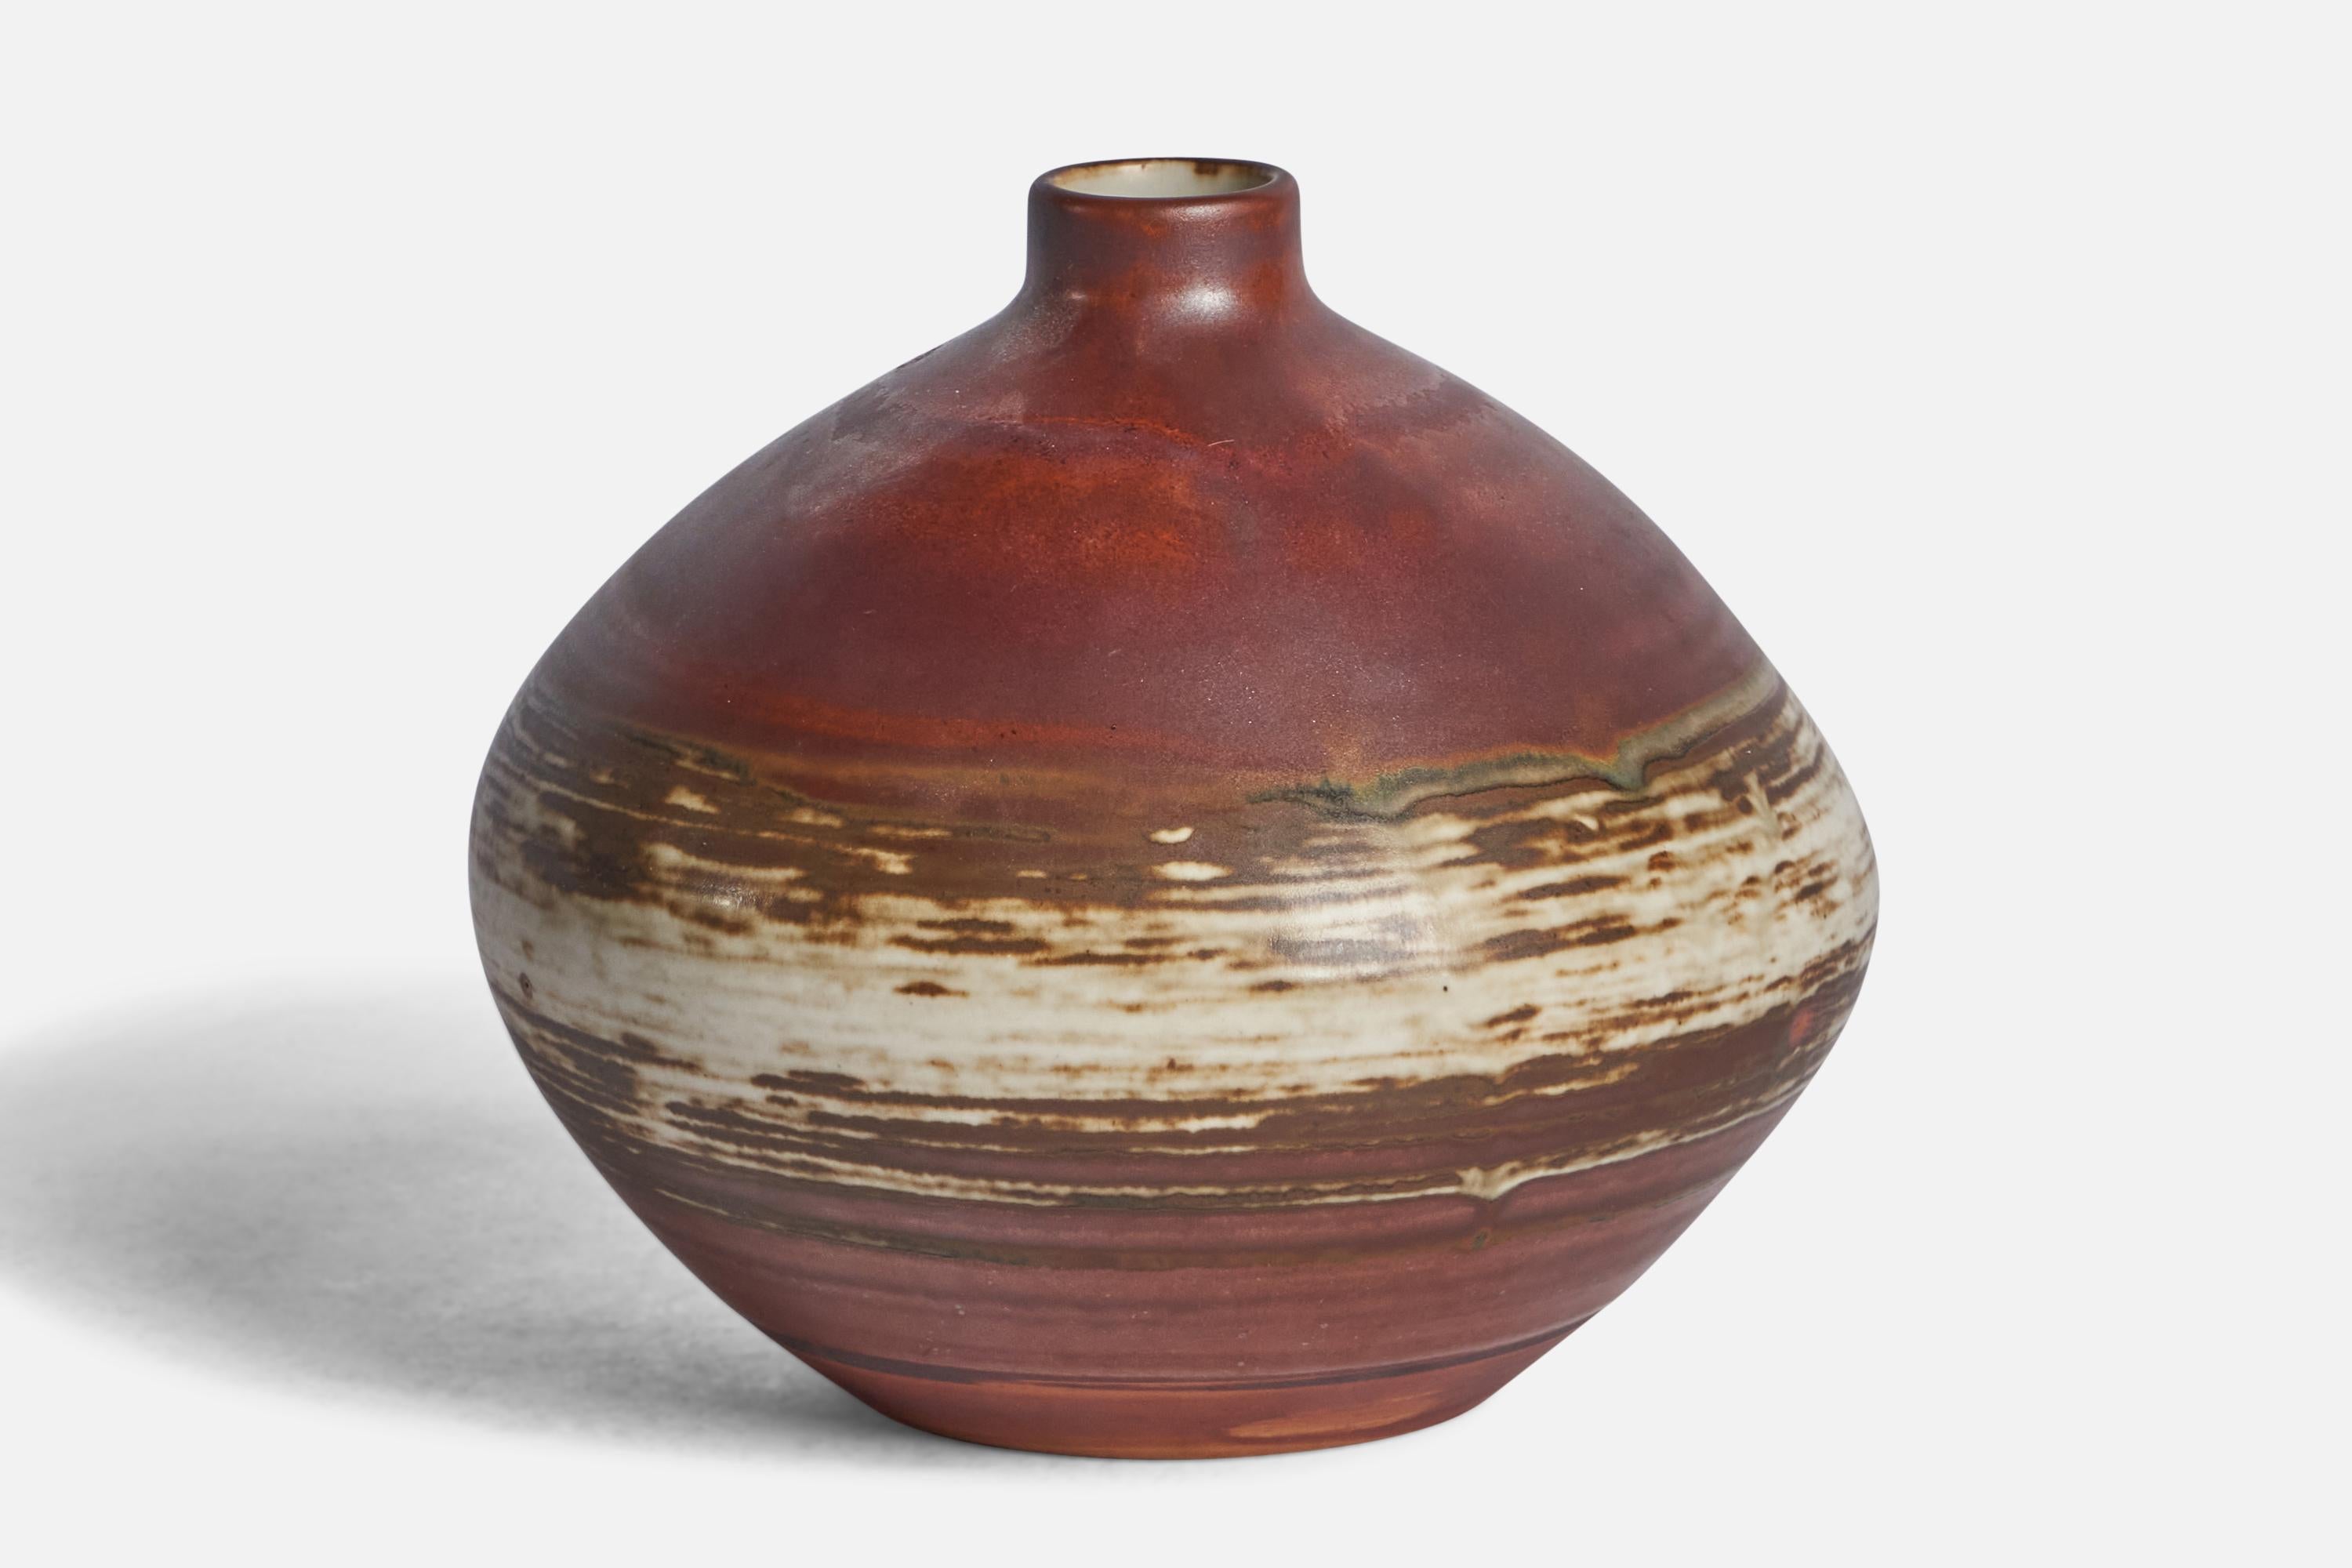 A red brown and off-white glazed stoneware vase designed and produced by John Andersson, Höganäs, Sweden, 1960s.